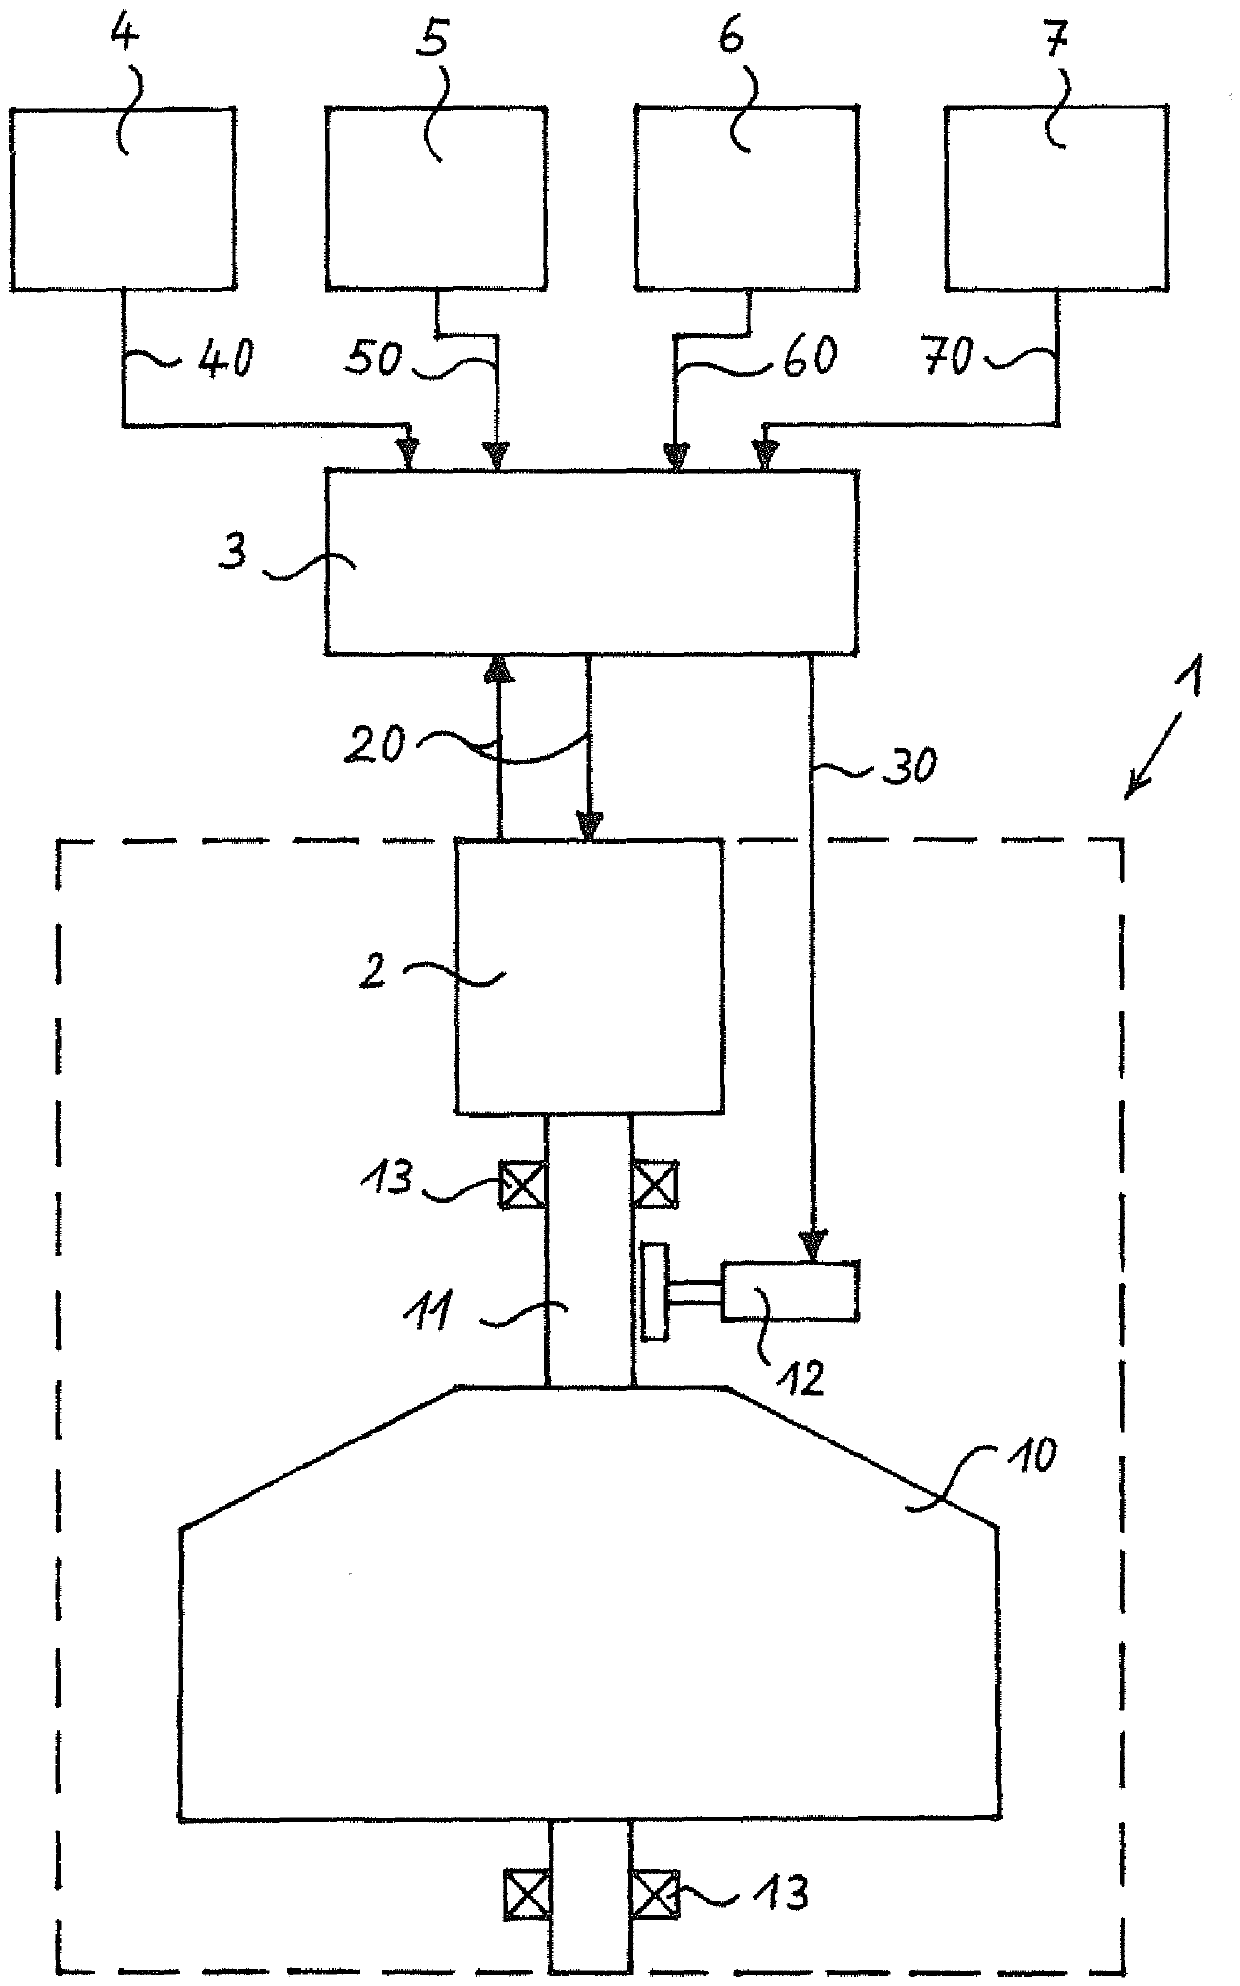 Method for operating a centrifugal separator